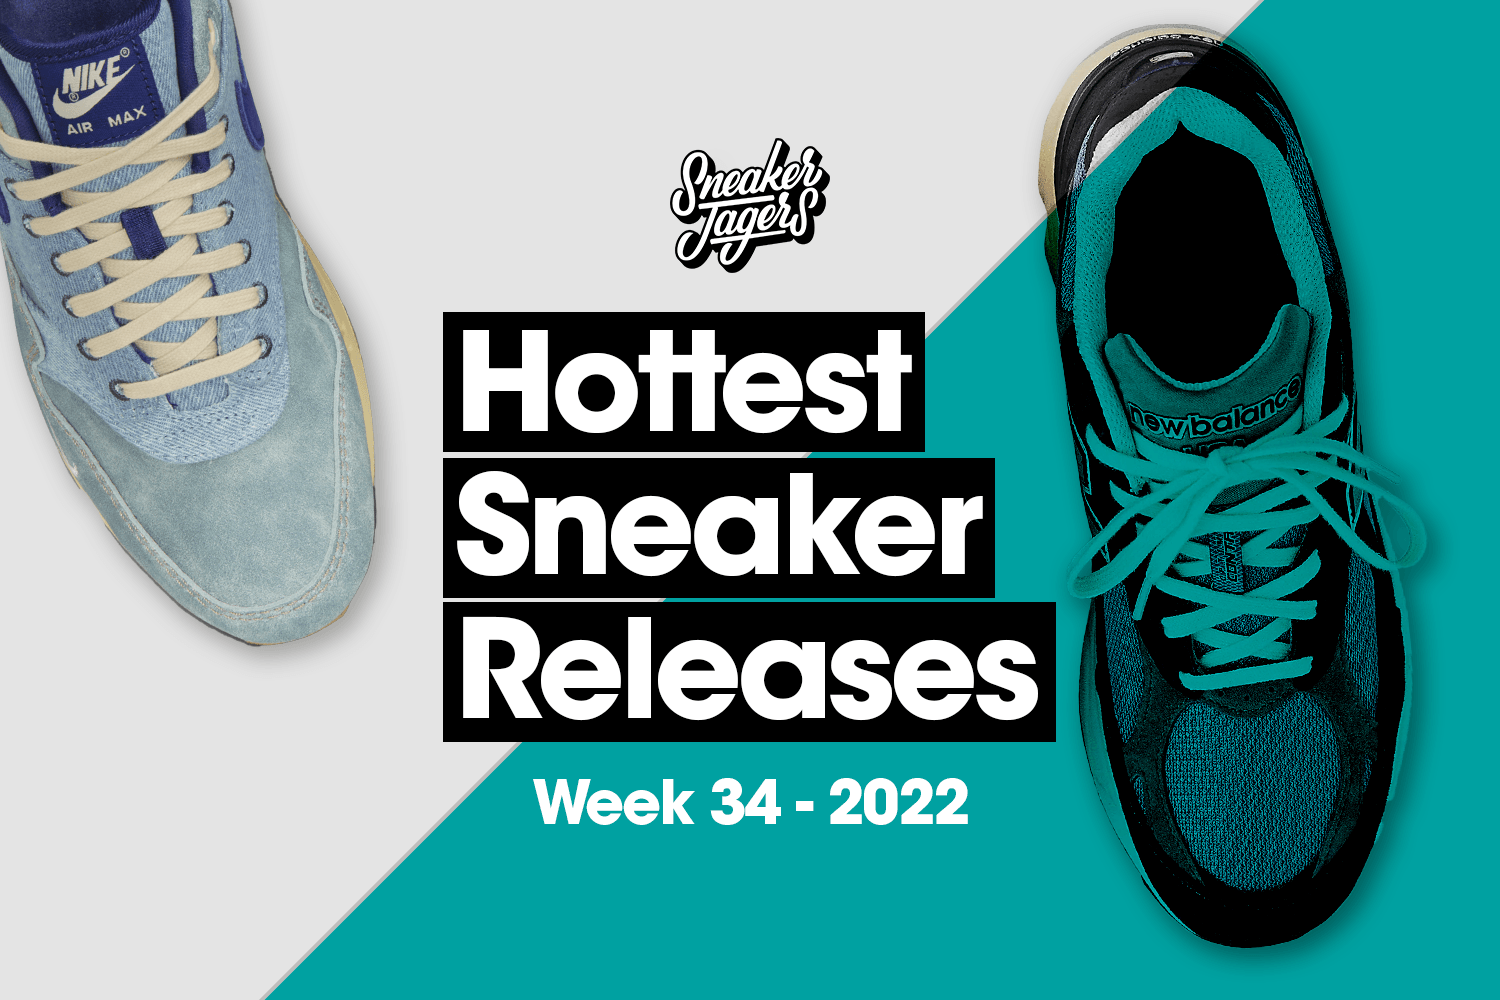 Hottest Sneaker Releases - WK 34